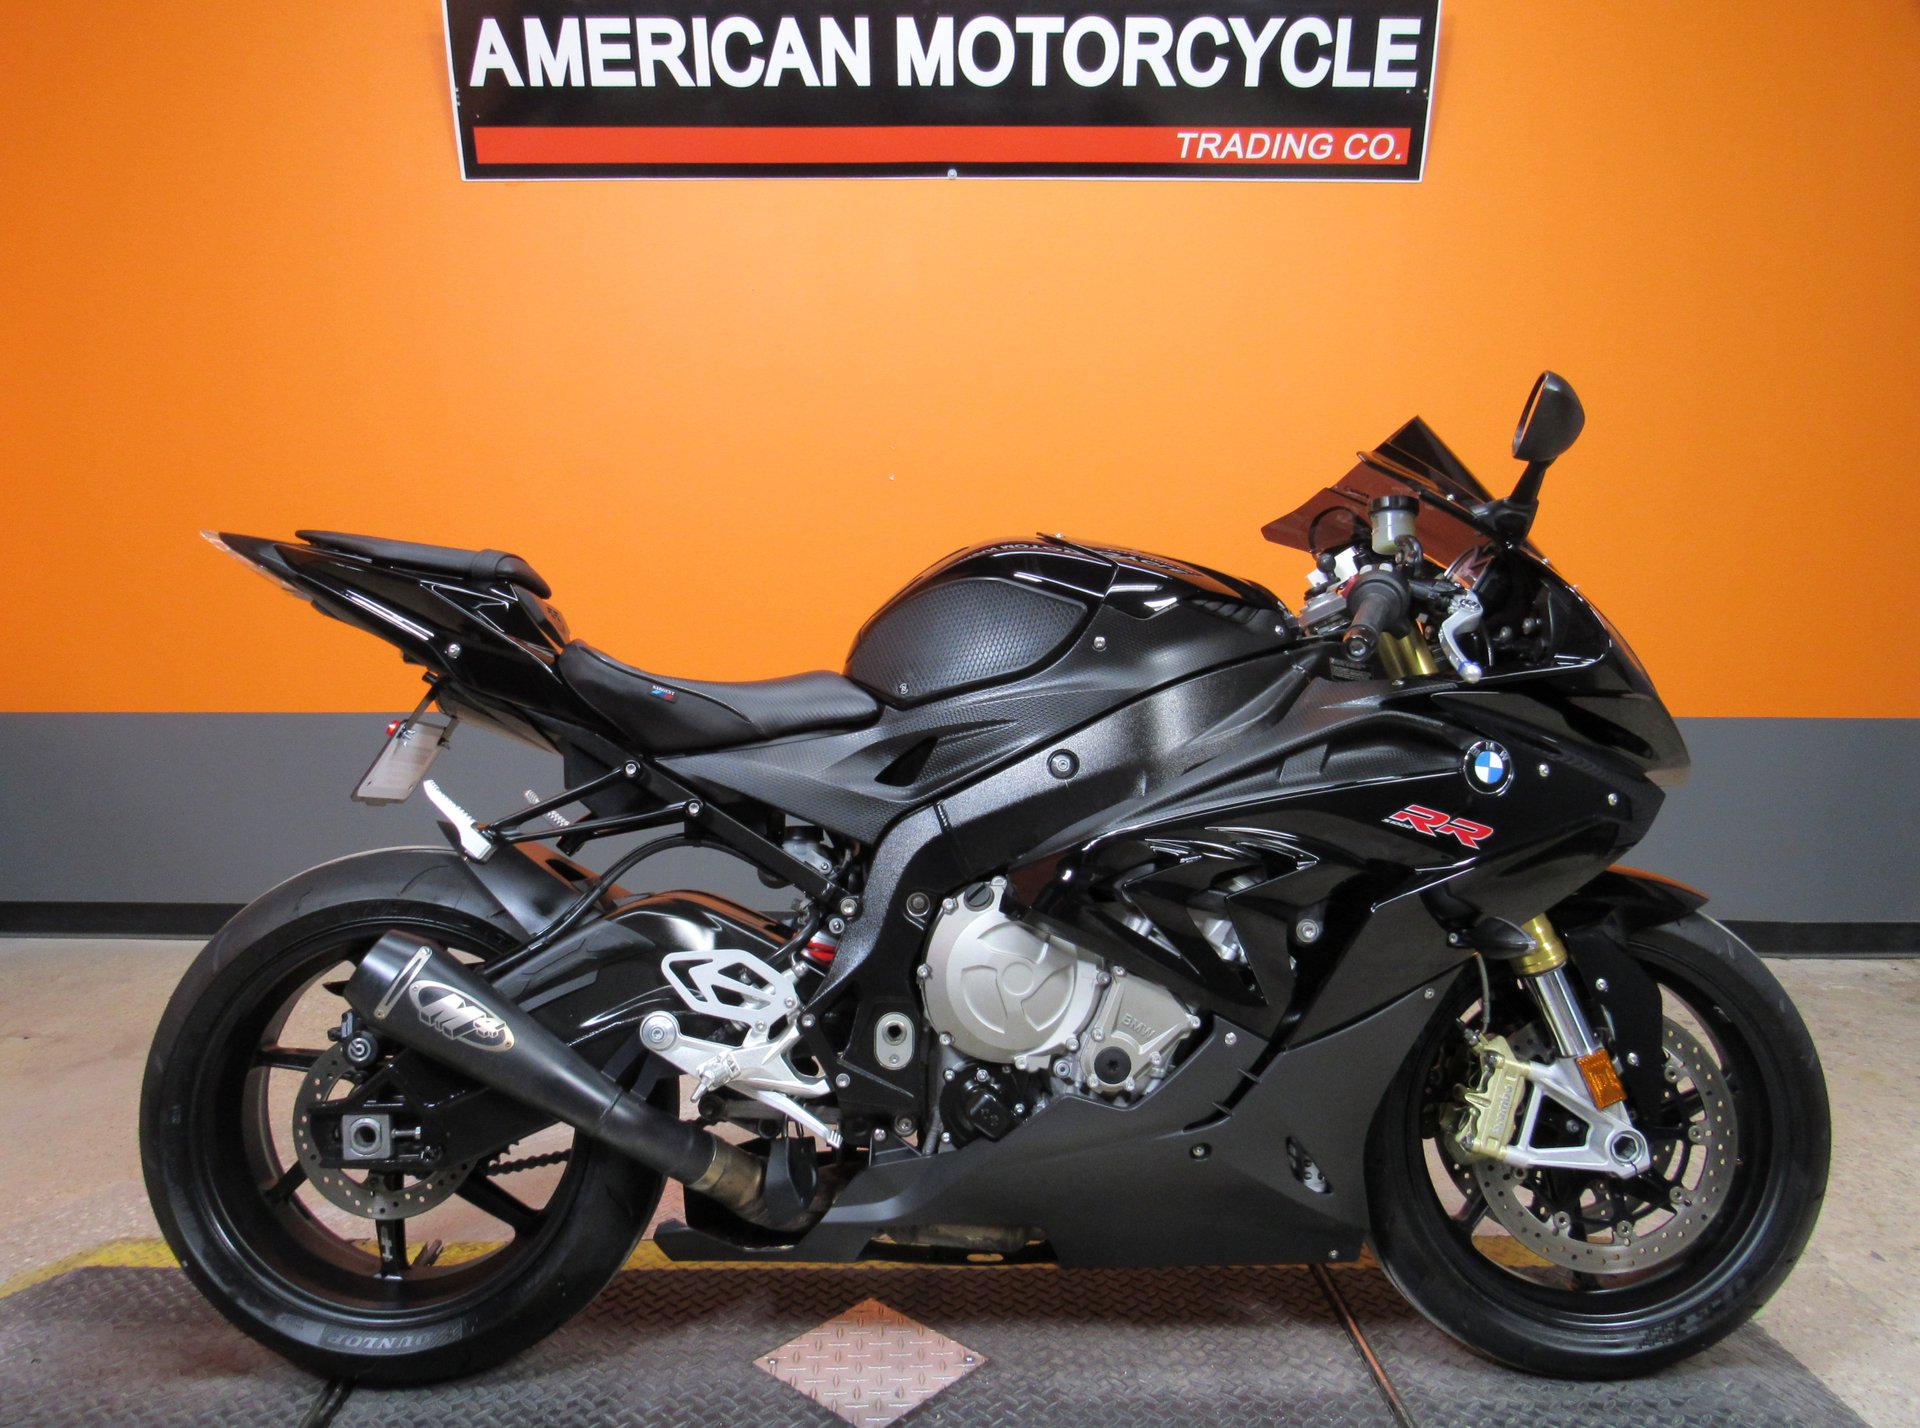 2016 BMW S1000RR | American Motorcycle Trading Company - Used Harley Davidson Motorcycles